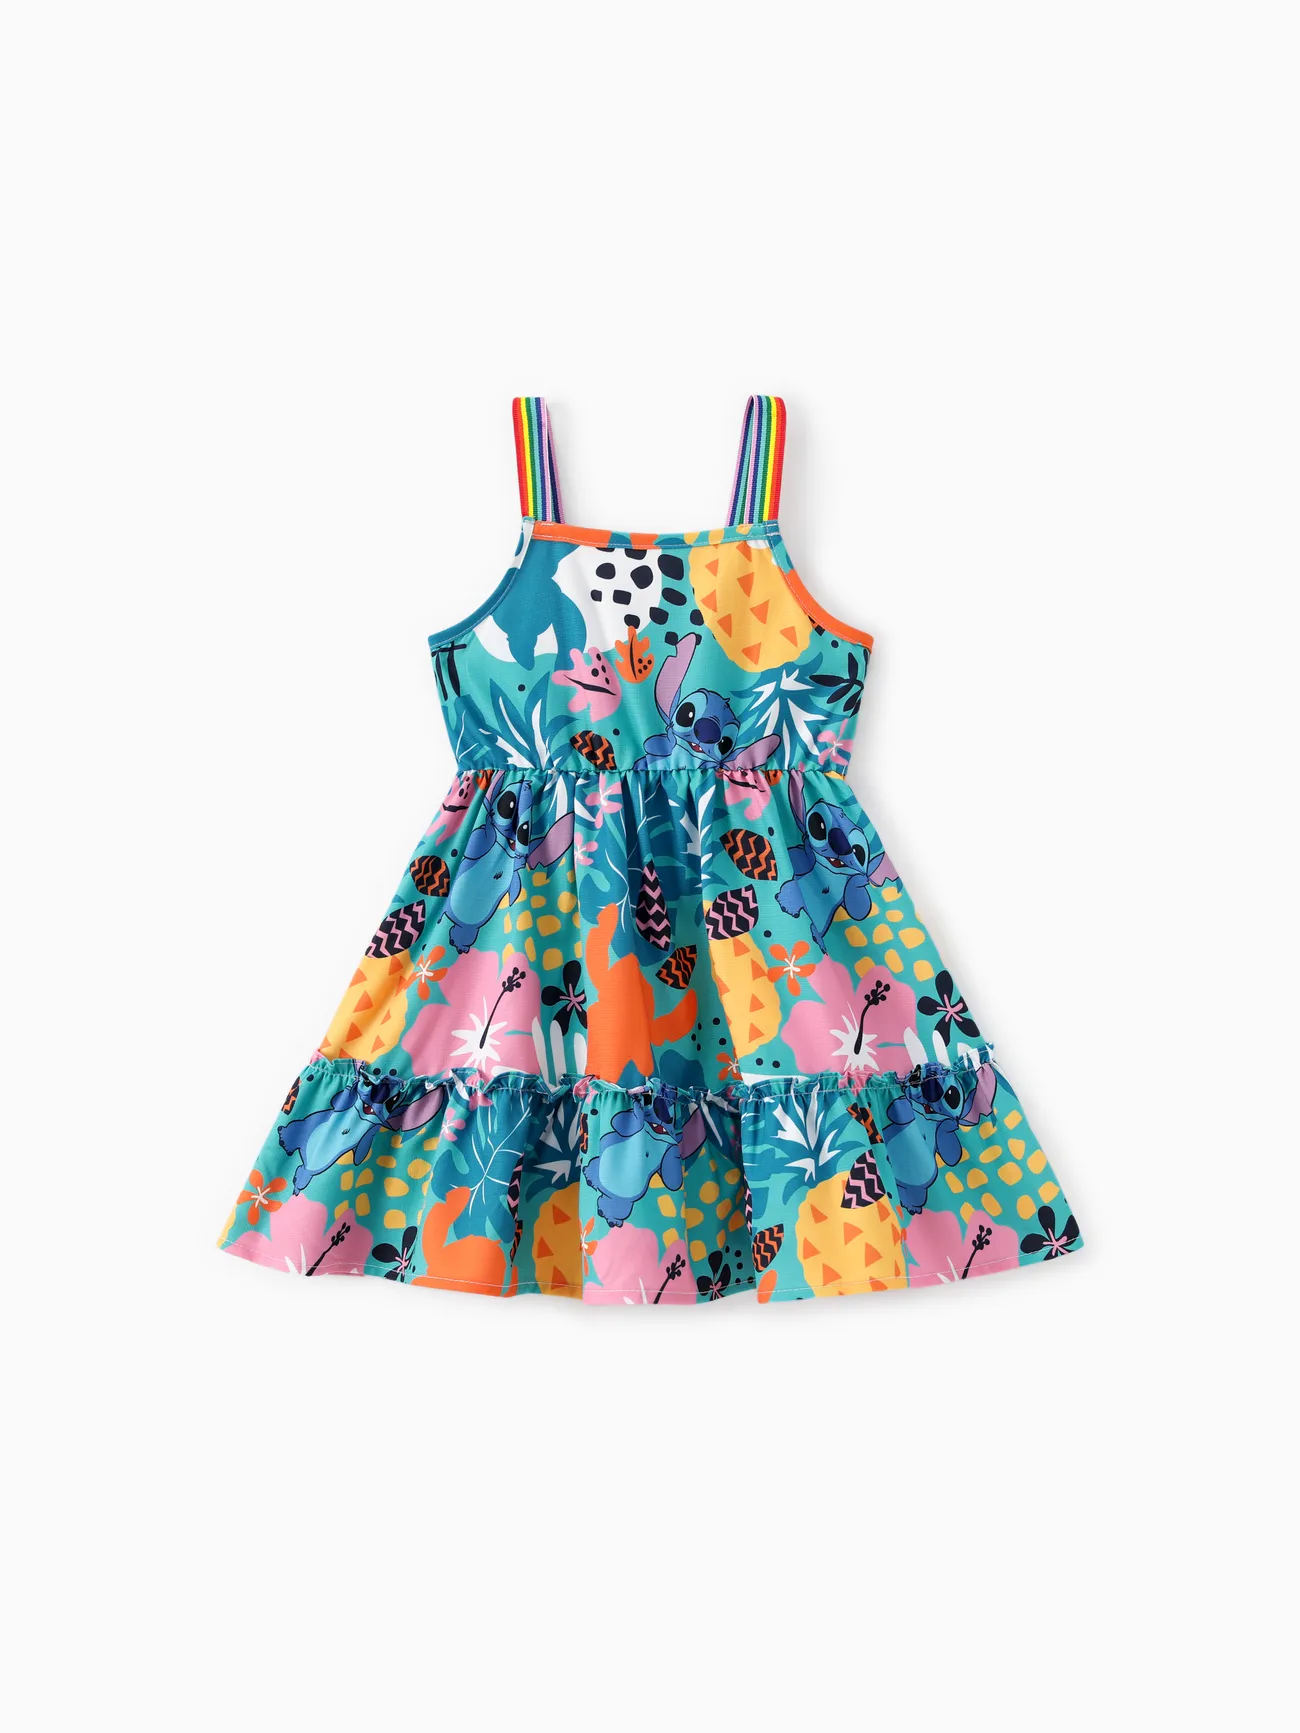 Disney Stitch Toddler Girls 1pc Plant Characters Print with Tropical Rainforest Vibe Sleeveless Dress Green big image 1